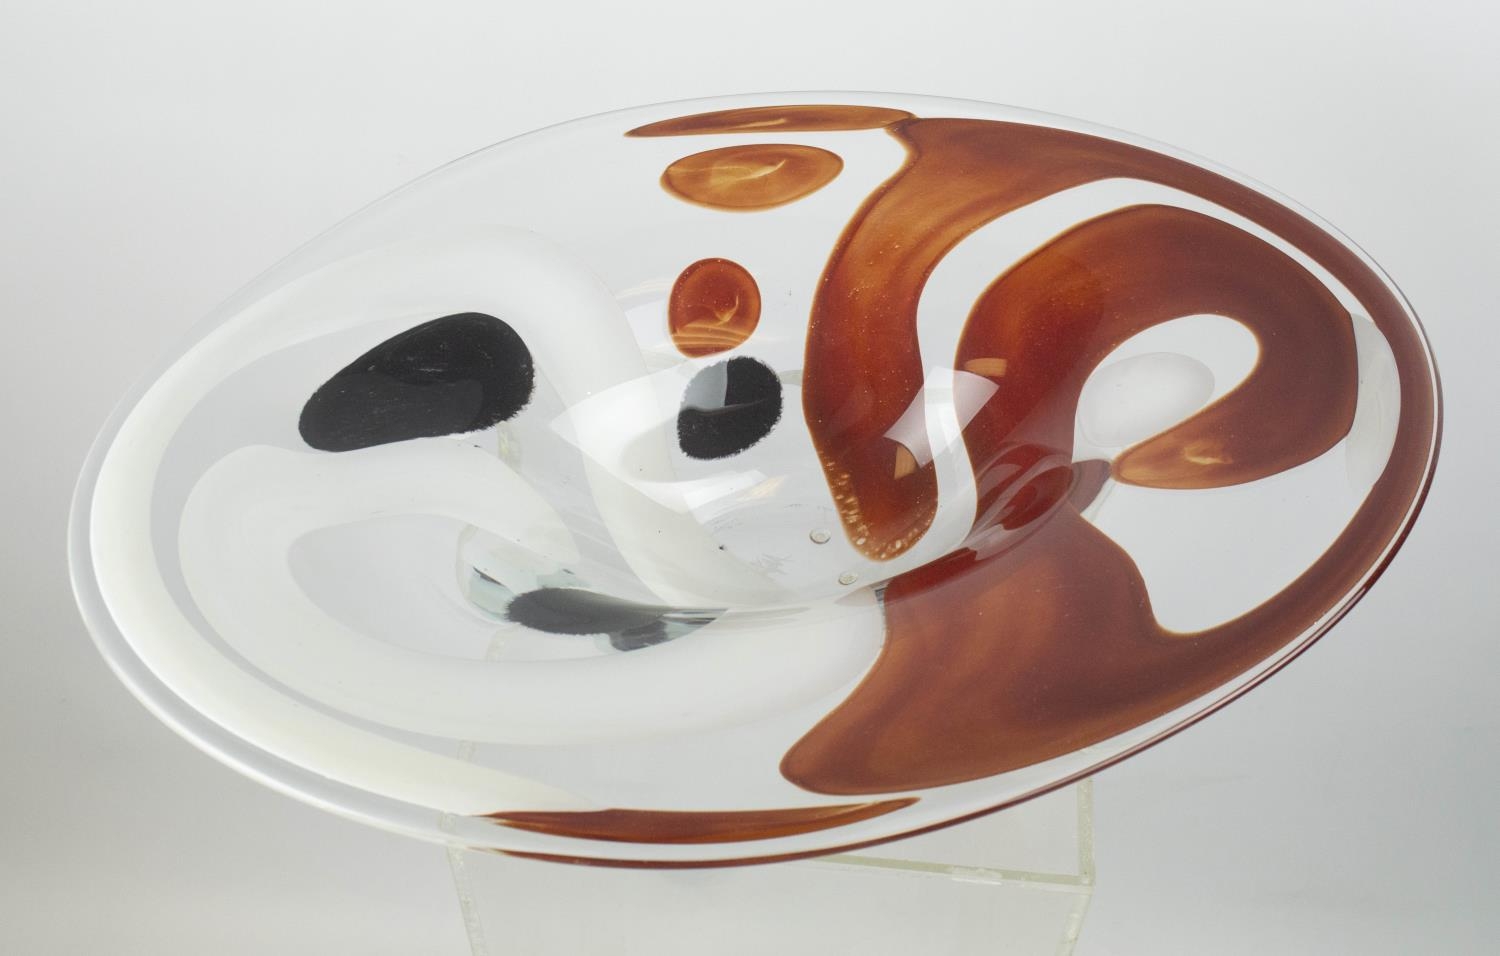 ART GLASS BOWL, late 20th century shaped with red, white and black design, 52cm L x 39cm W x 13cm H. - Image 6 of 8